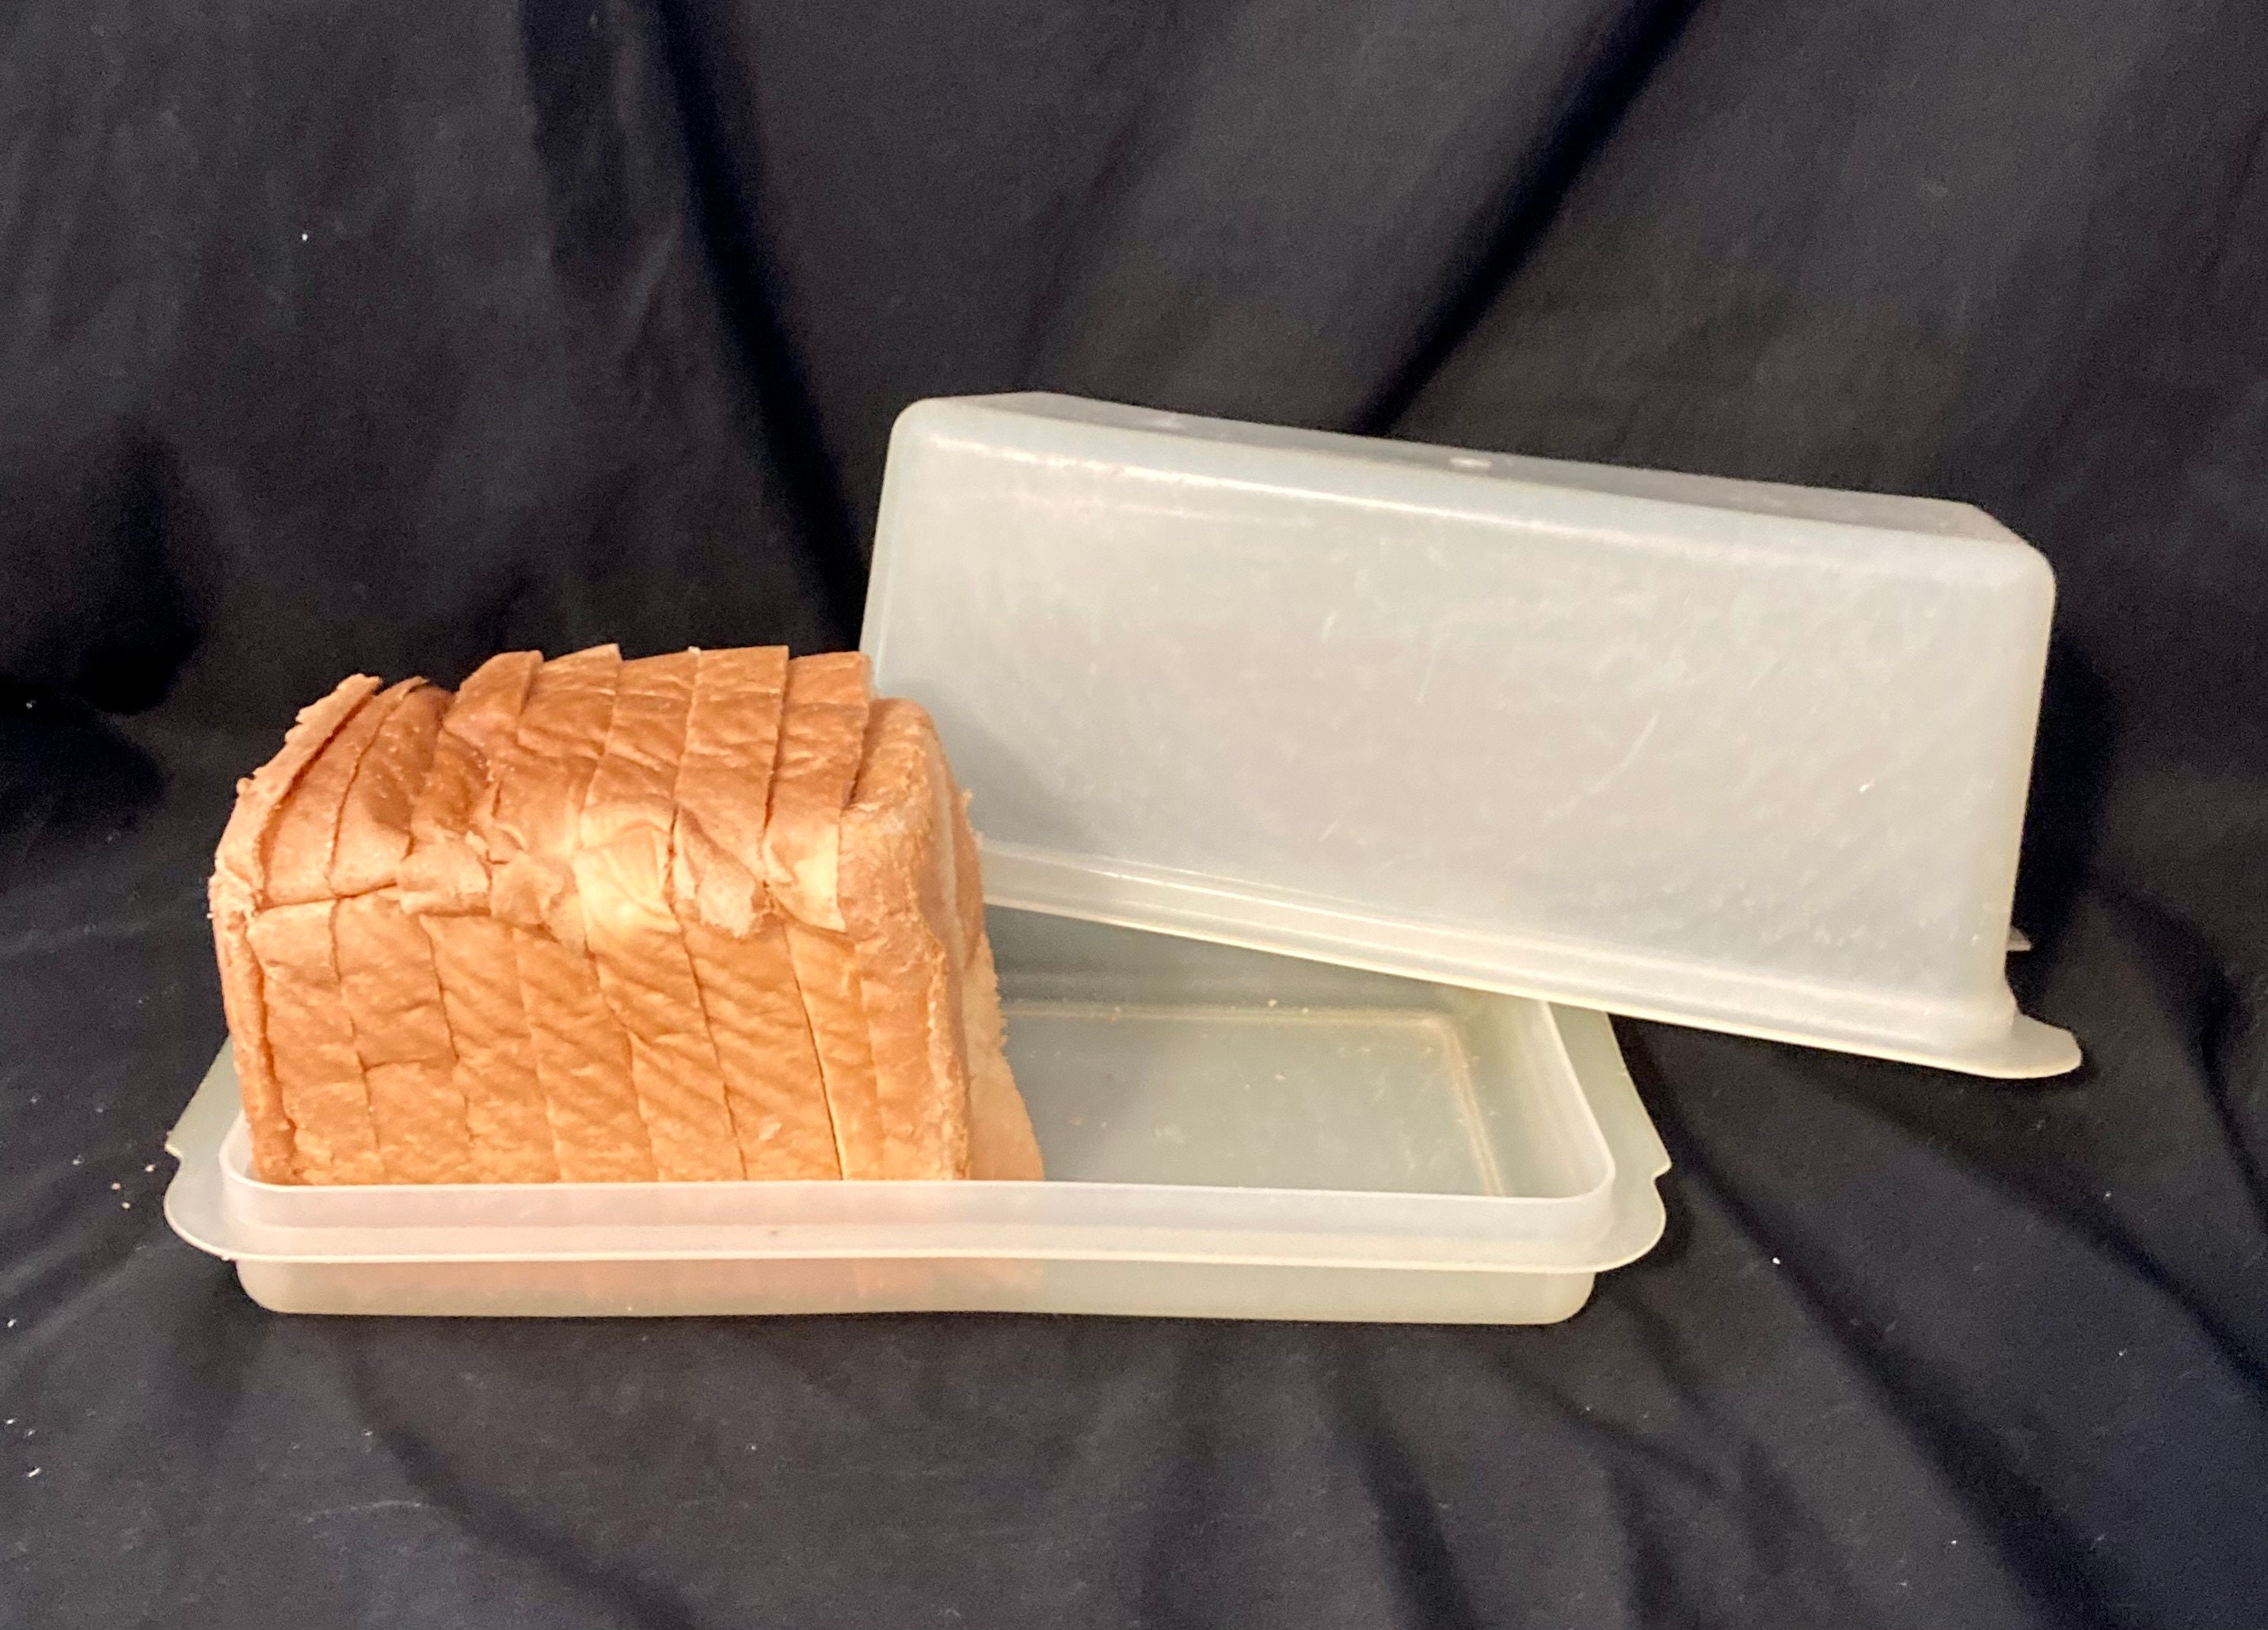 Tupperware Bread Server for Keeping Bread Loaves Fresh on The Counter and Ready for Table Serving